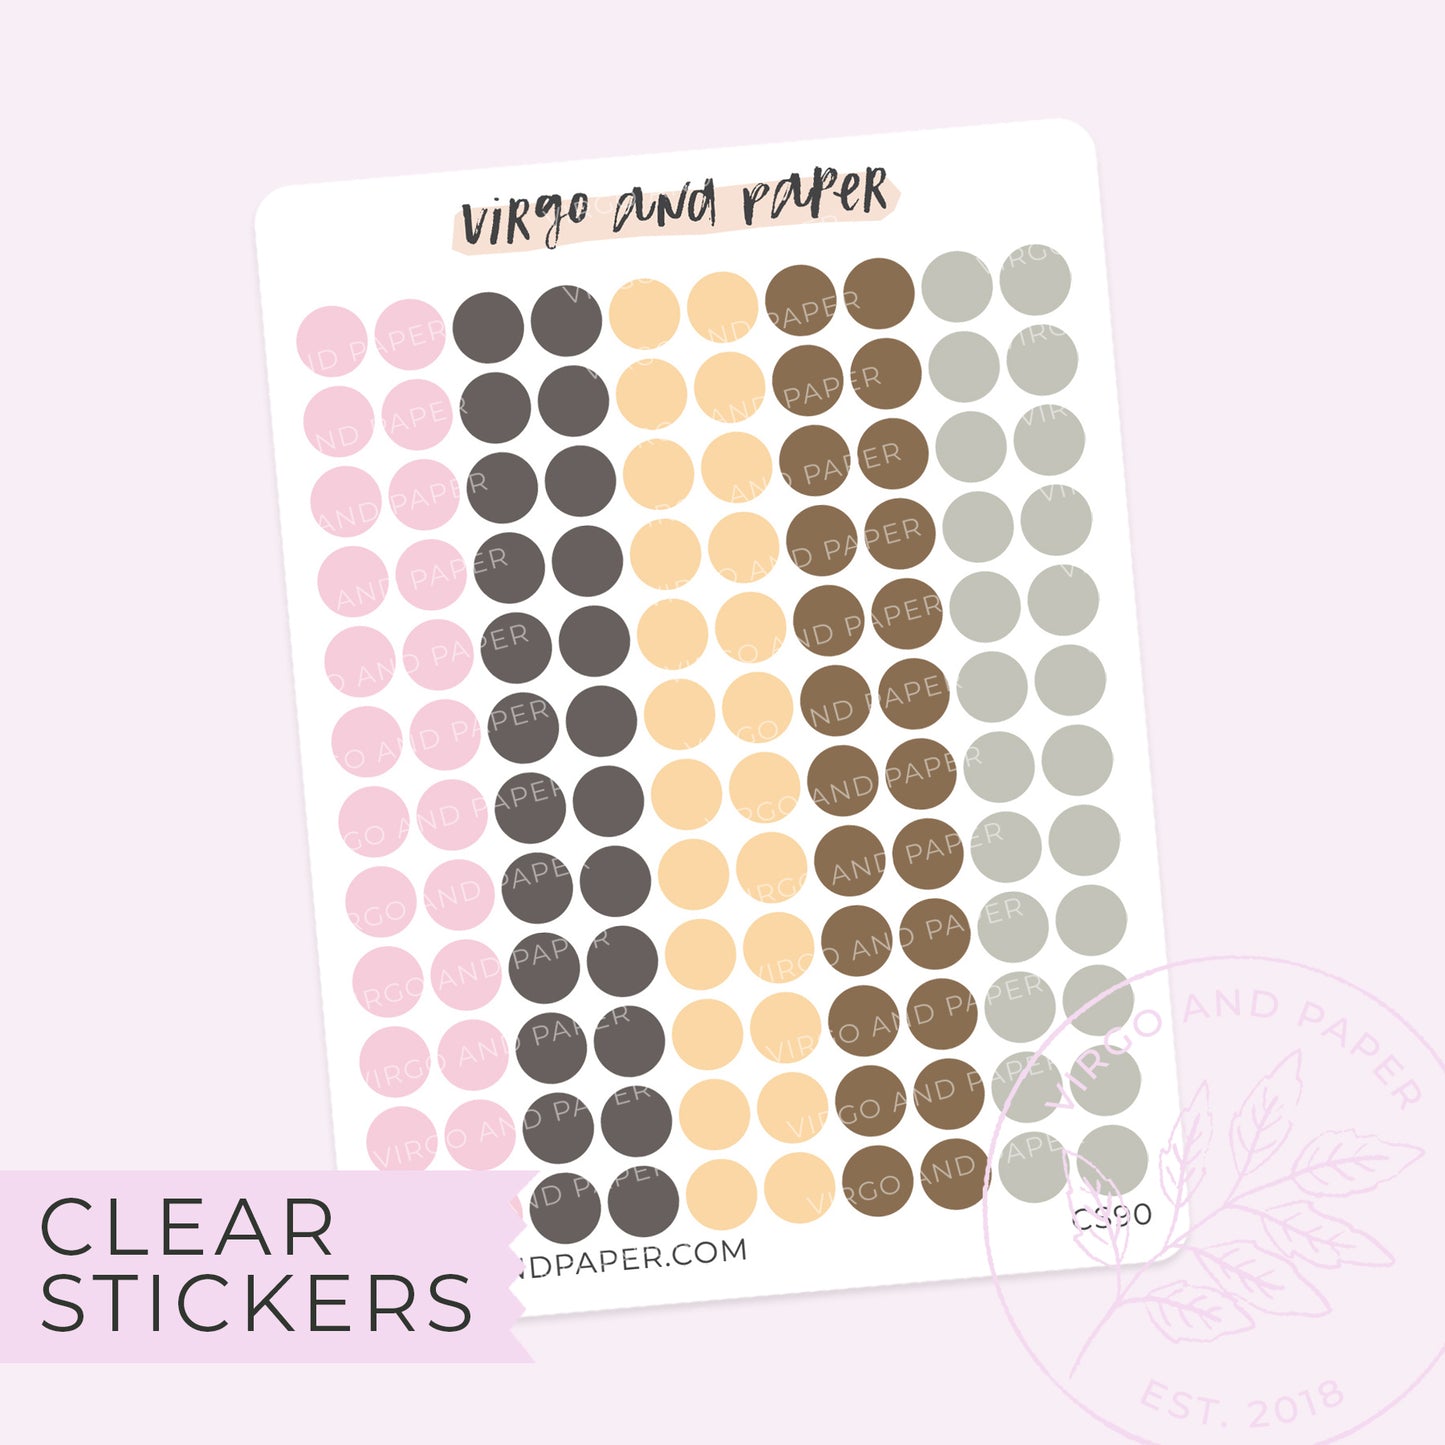 Highlighter Colors Clear Dot Stickers - Neutrals